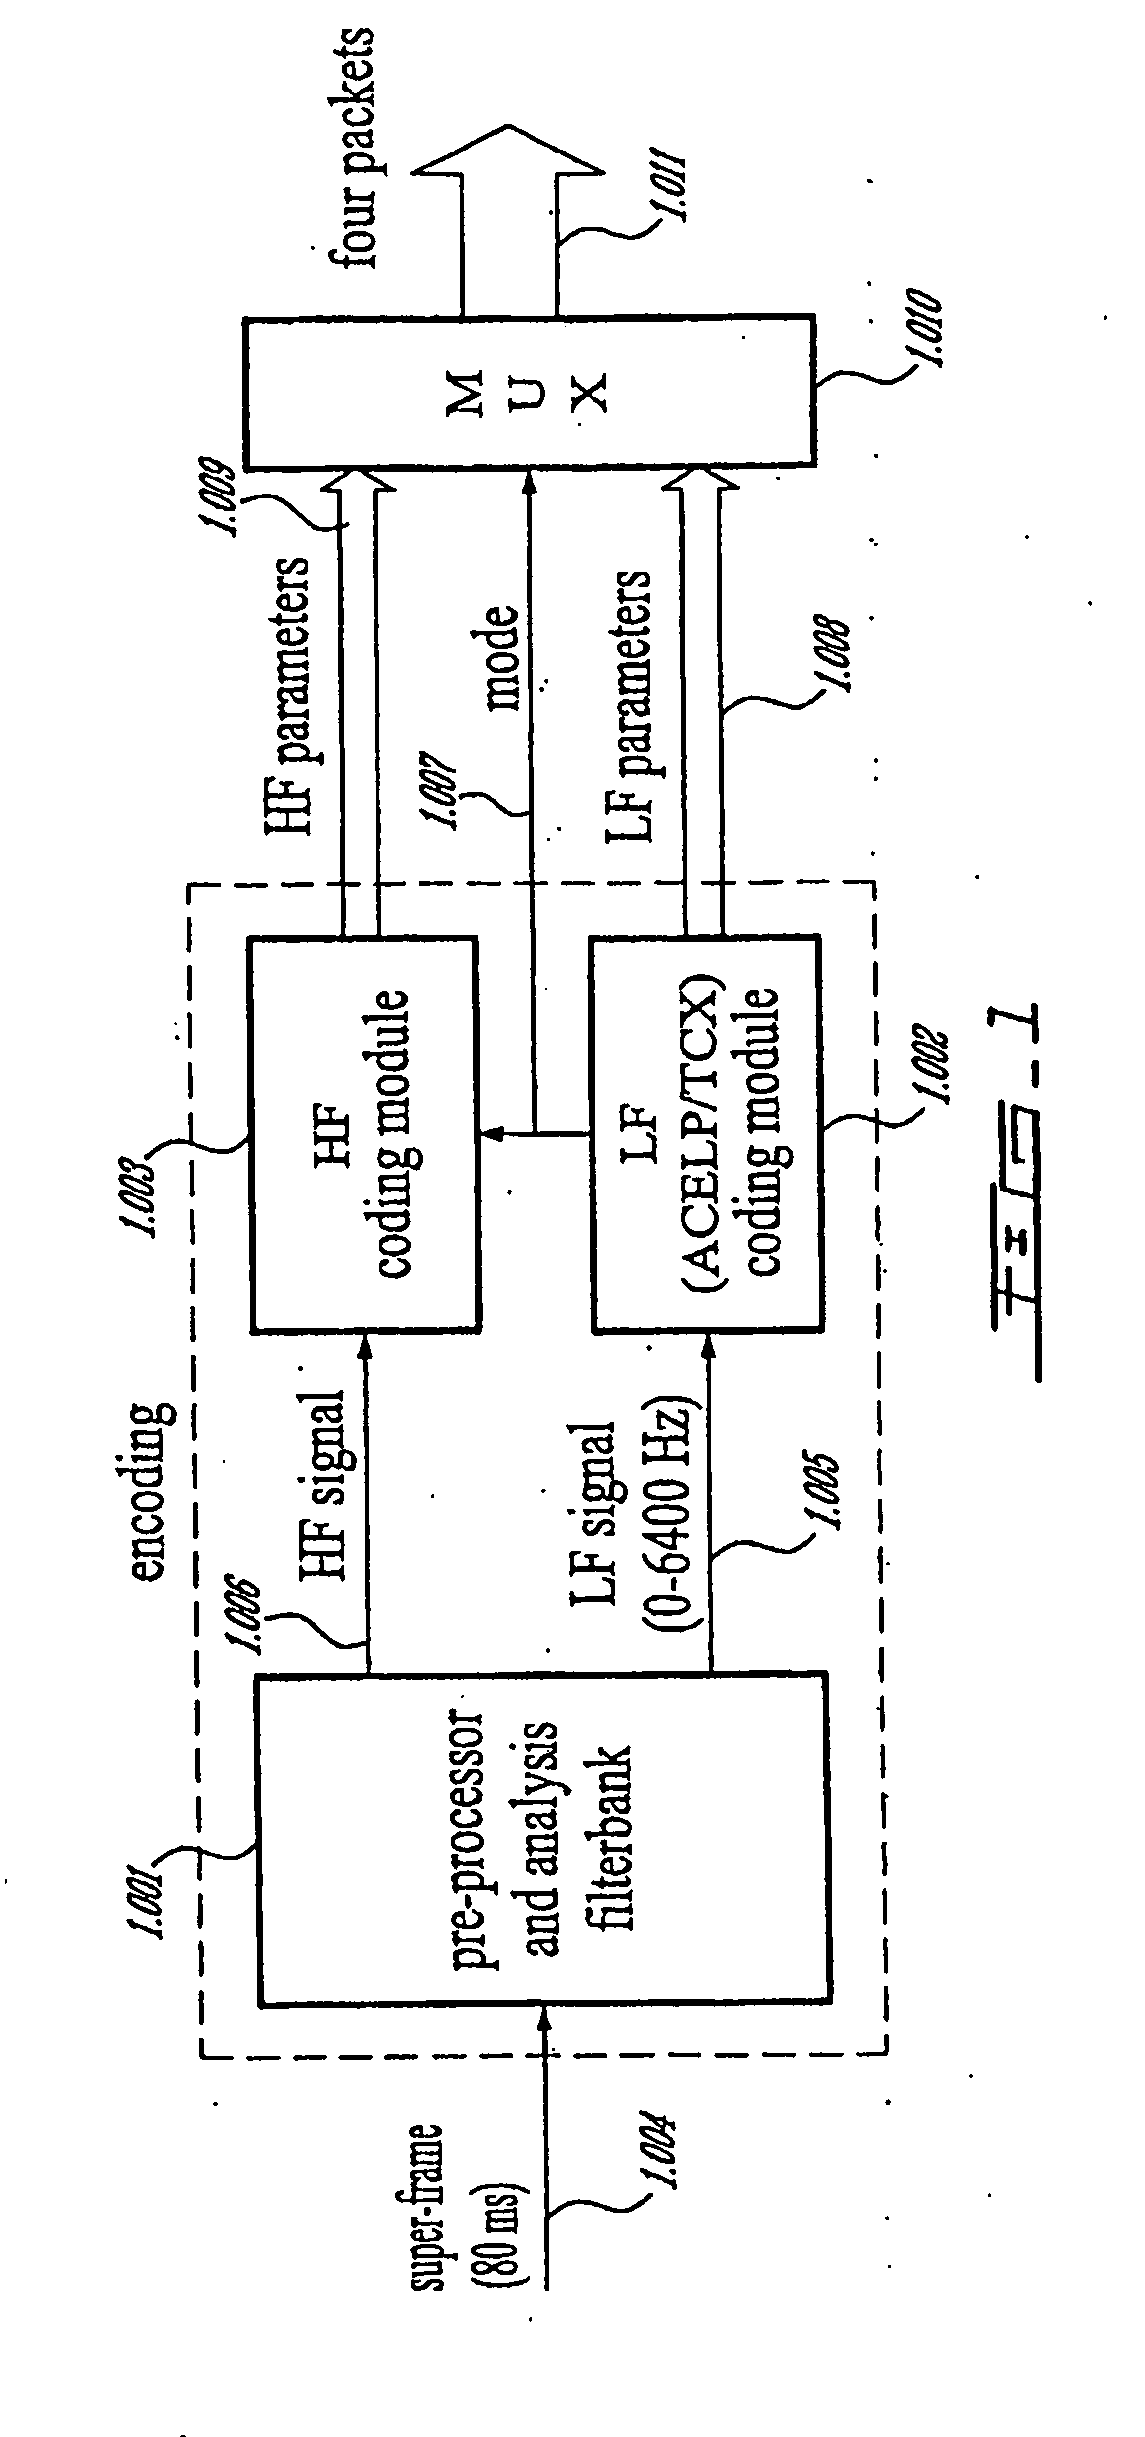 Methods and devices for low-frequency emphasis during audio compression based on ACELP/TCX